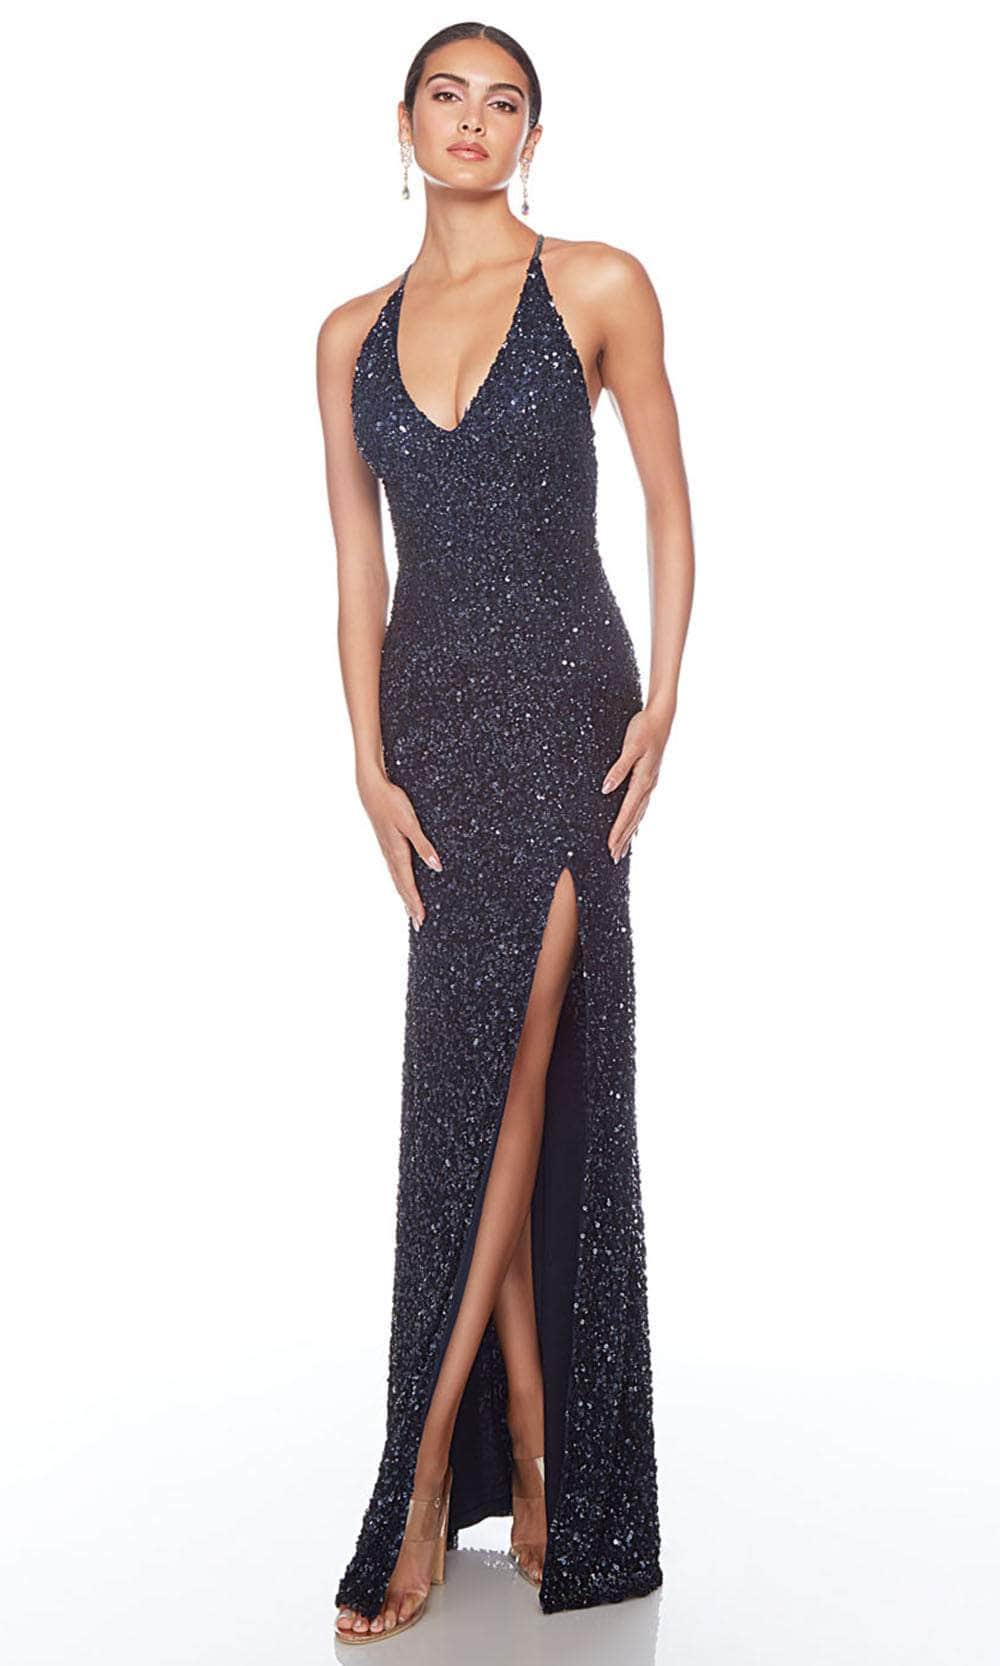 Image of Alyce Paris 88001 - Open Style Back Evening Dress